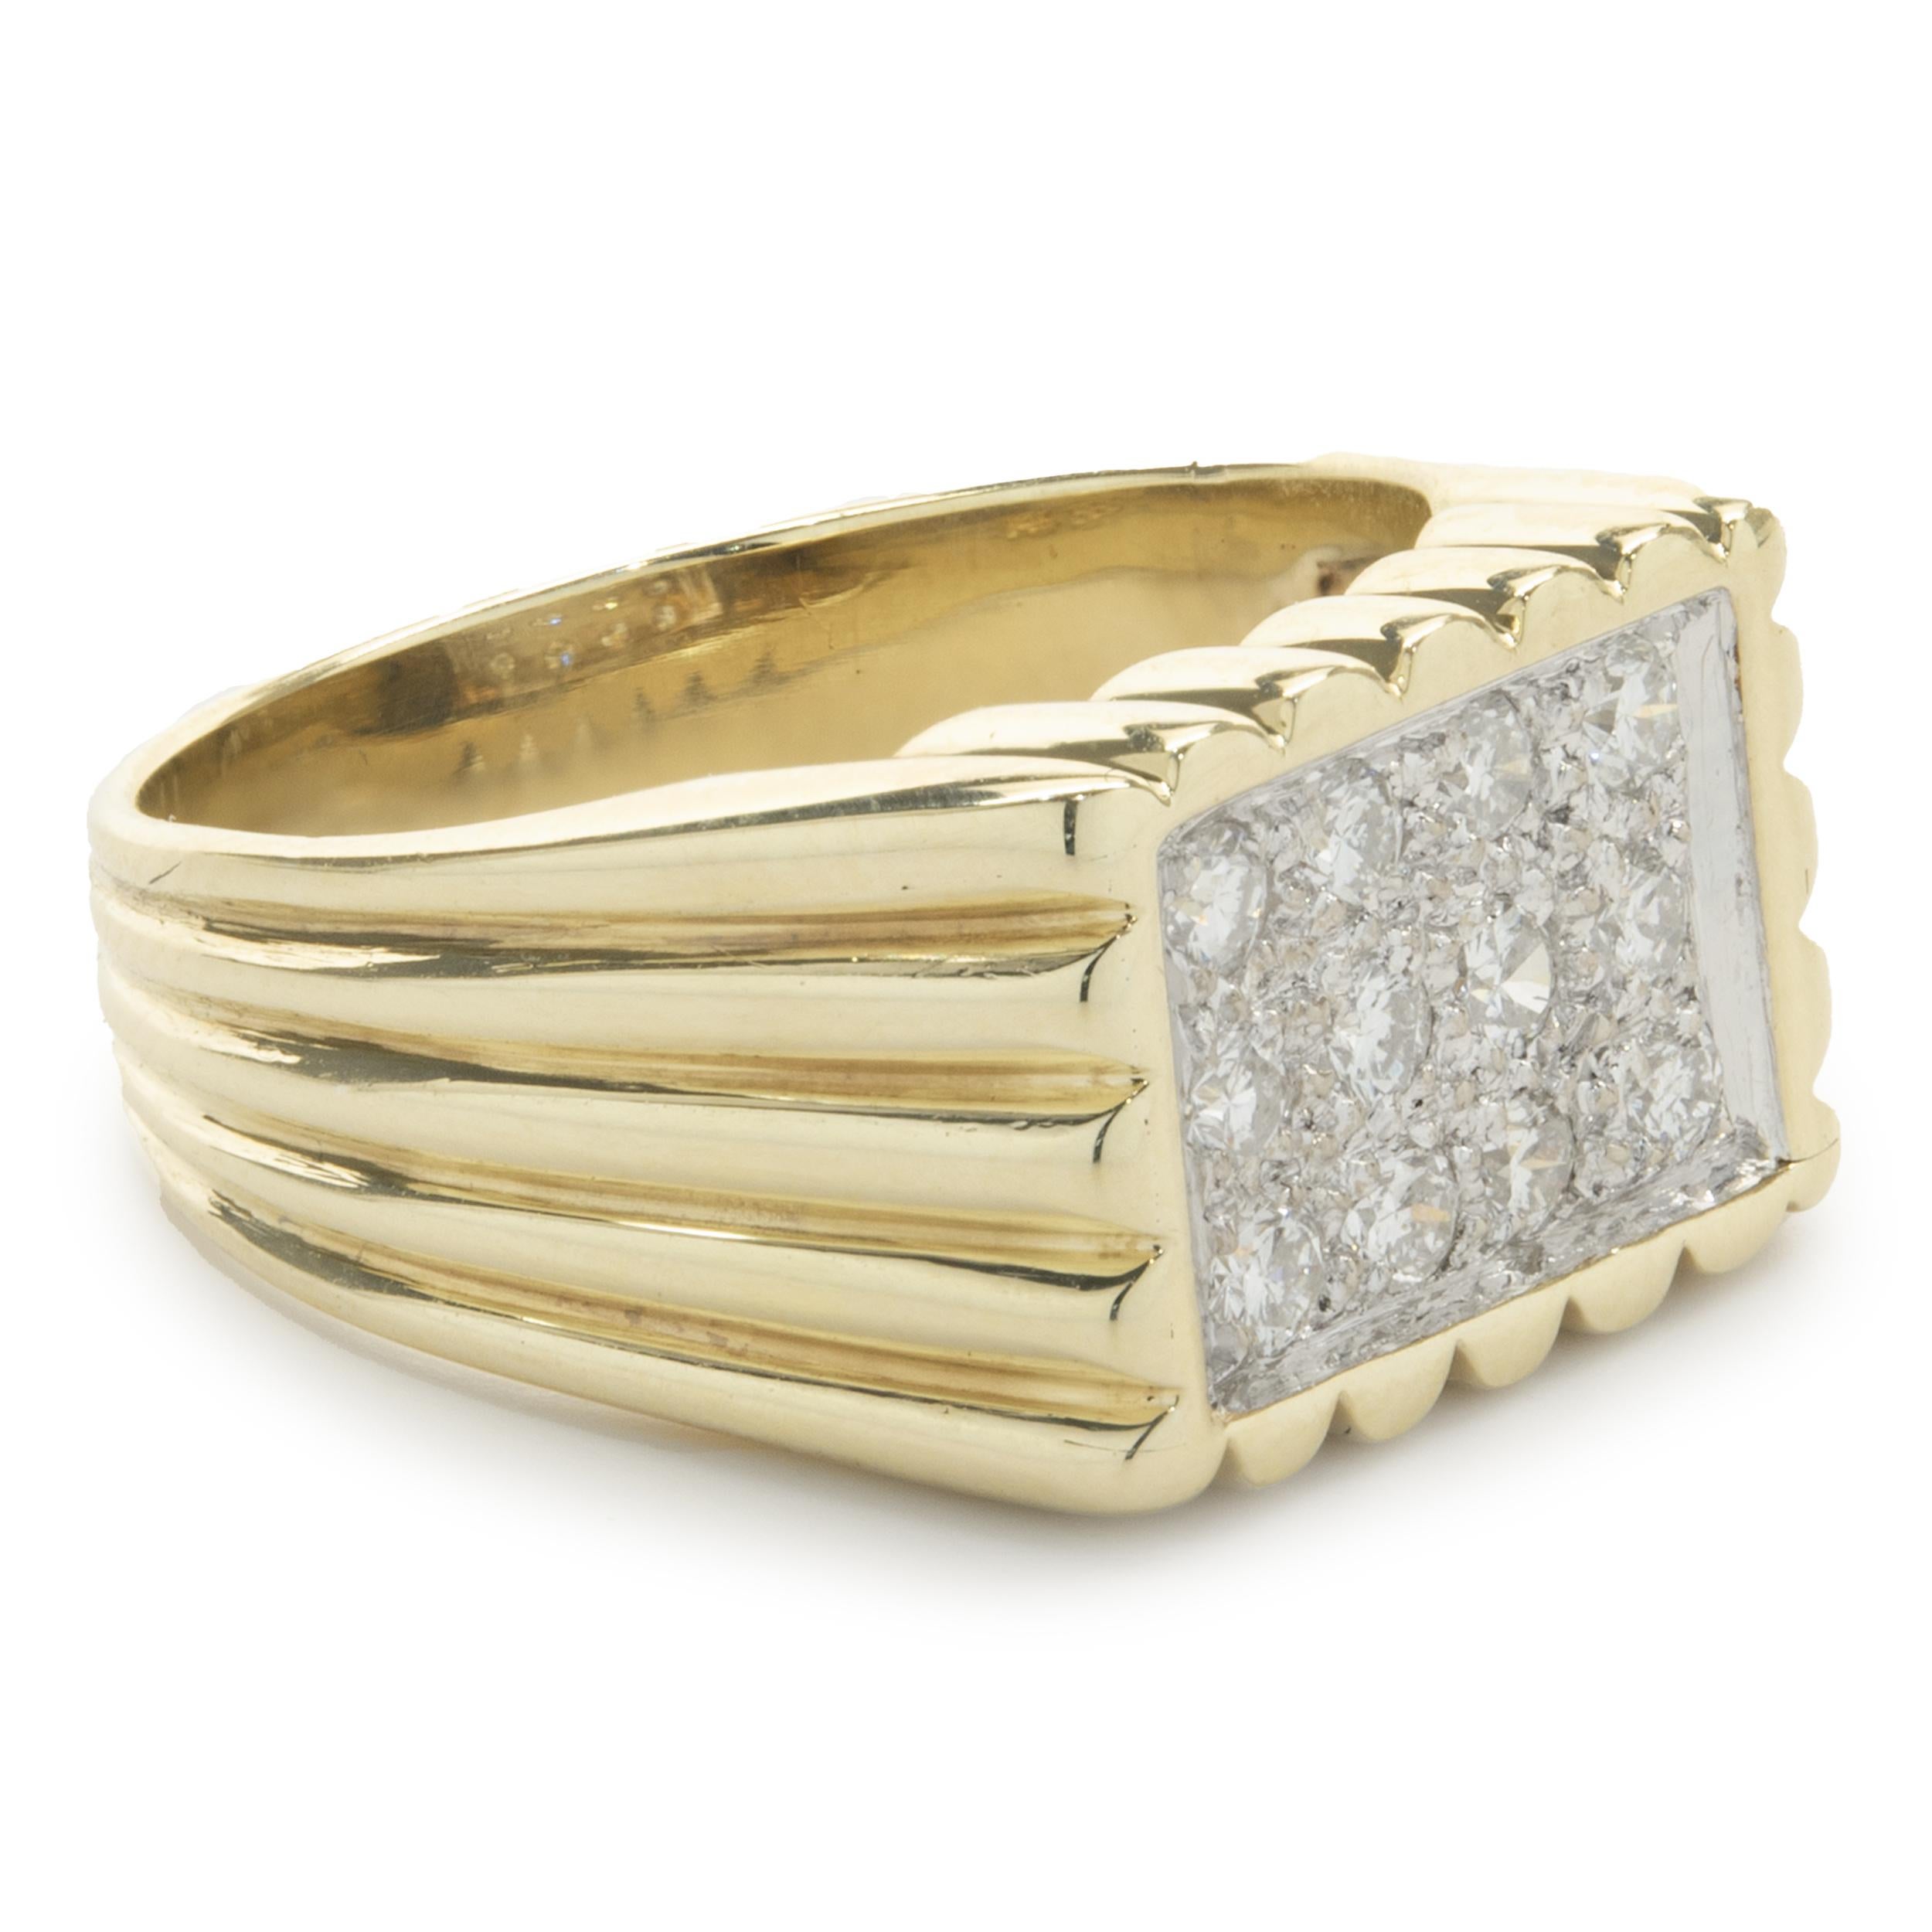 Designer: custom
Material: 14K yellow gold
Diamond: 12 round brilliant cut = 0.24cttw
Color: G
Clarity: SI2
Ring size: 6.5 (please allow two additional shipping days for sizing requests)
Weight:  6.63 grams